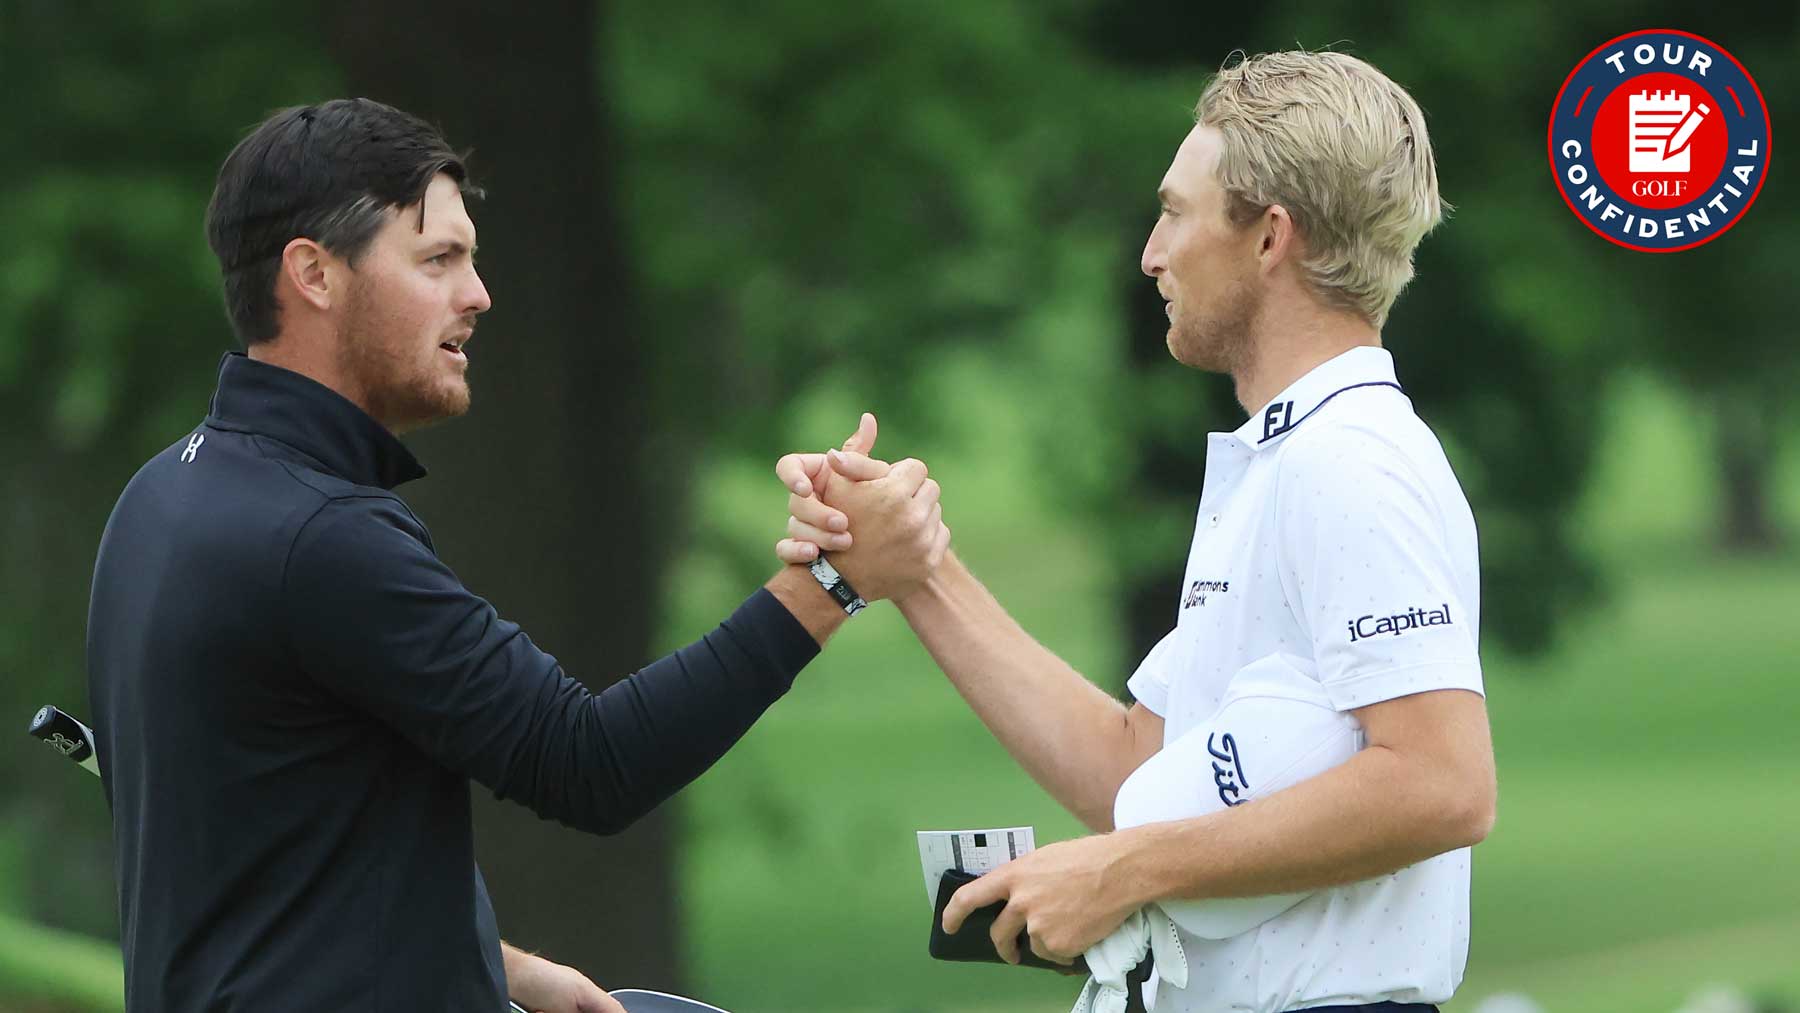 Mito Pereira of Chile and Will Zalatoris of the United States shake hands on the 18th green during the third round of the 2022 PGA Championship at Southern Hills Country Club on May 21, 2022 in Tulsa, Oklahoma